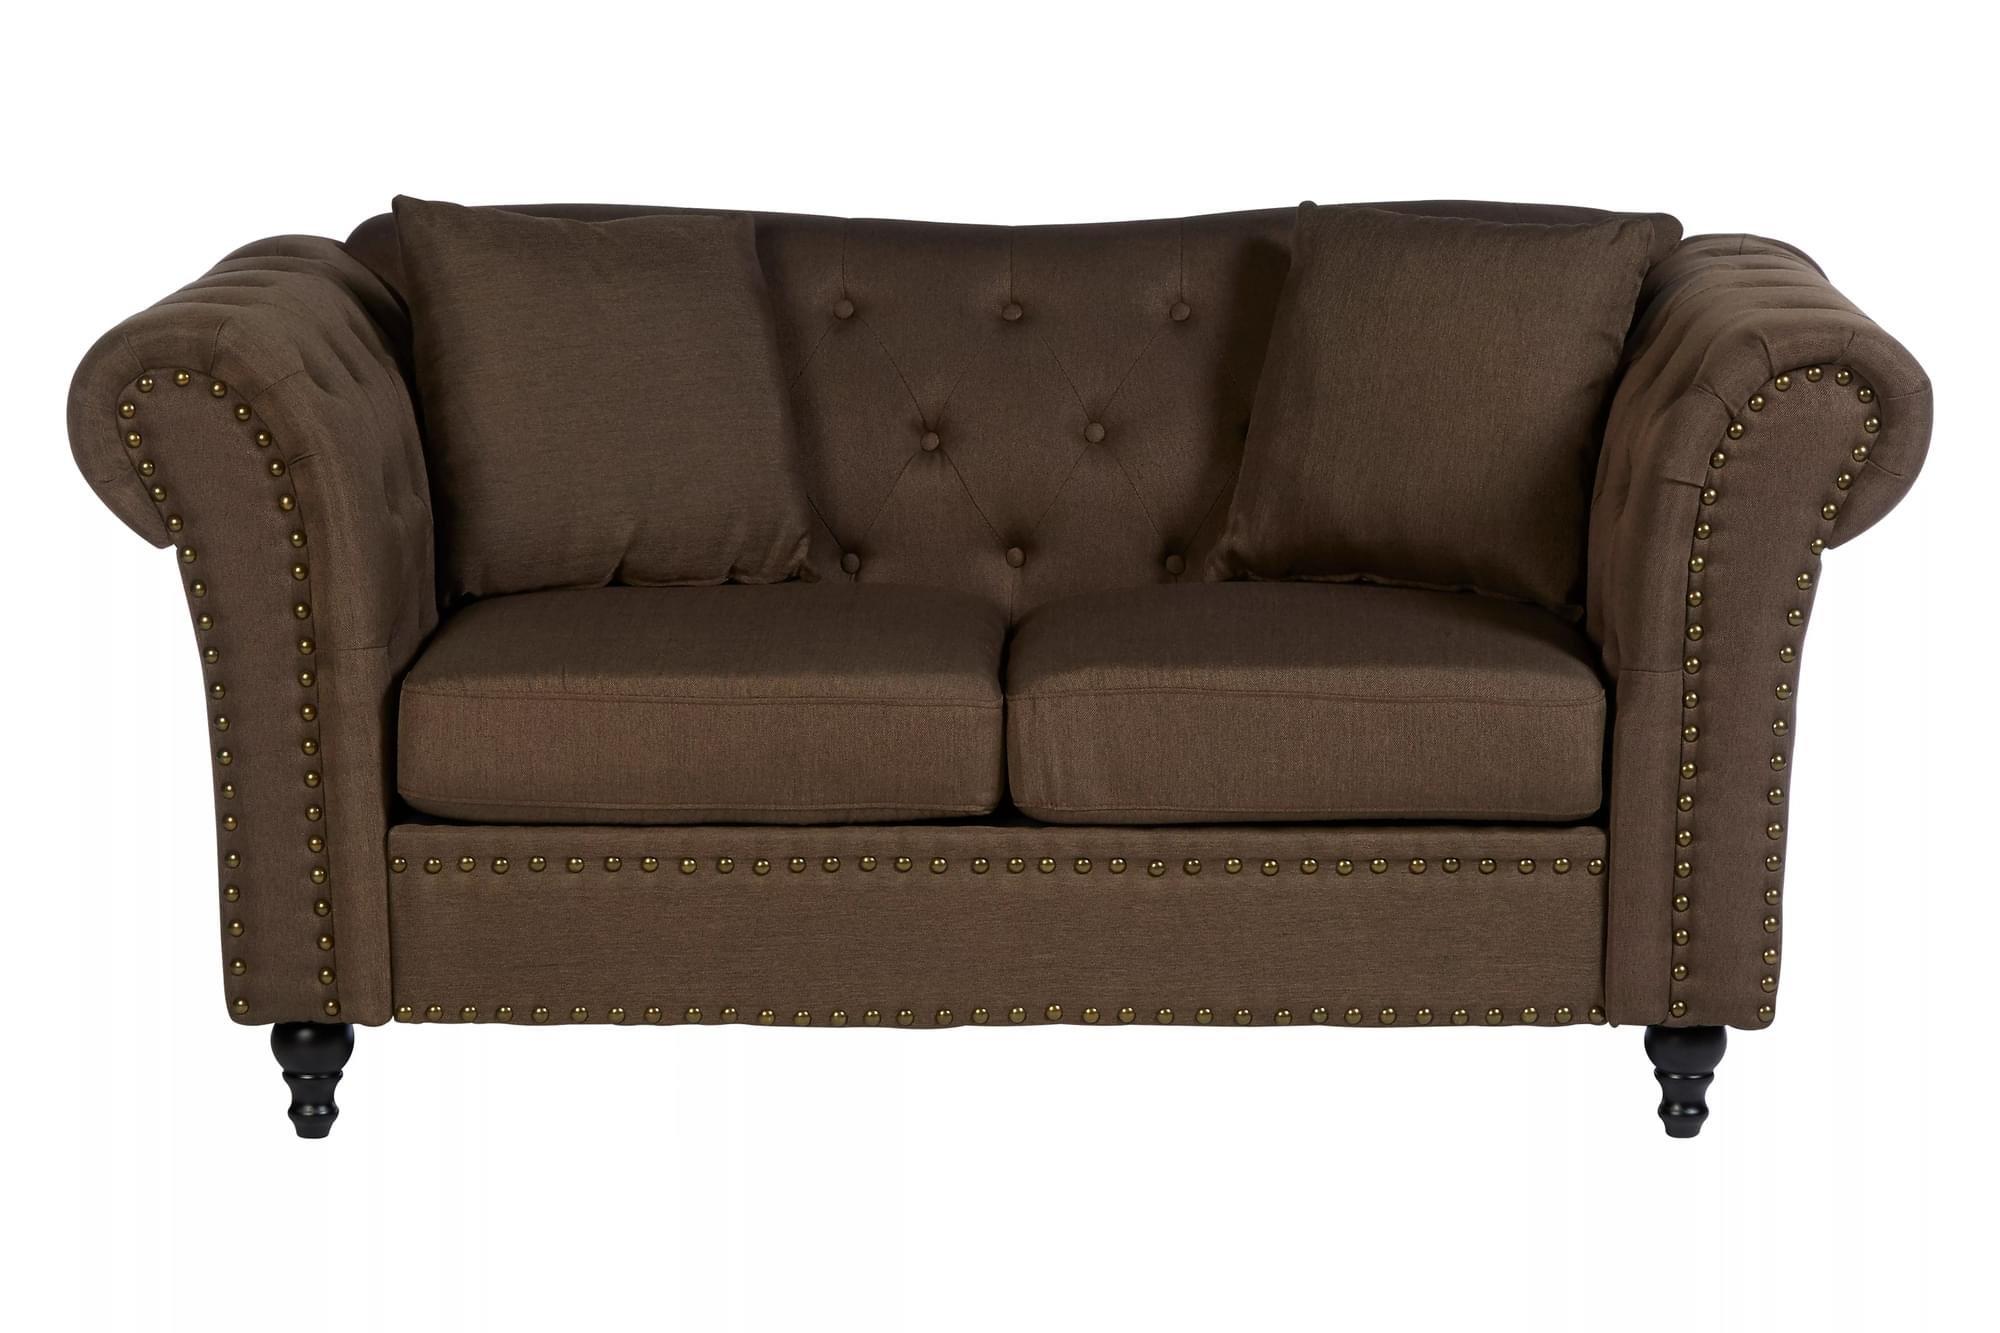 Interiors by Premier Fable 2 Seat Chesterfield Sofa